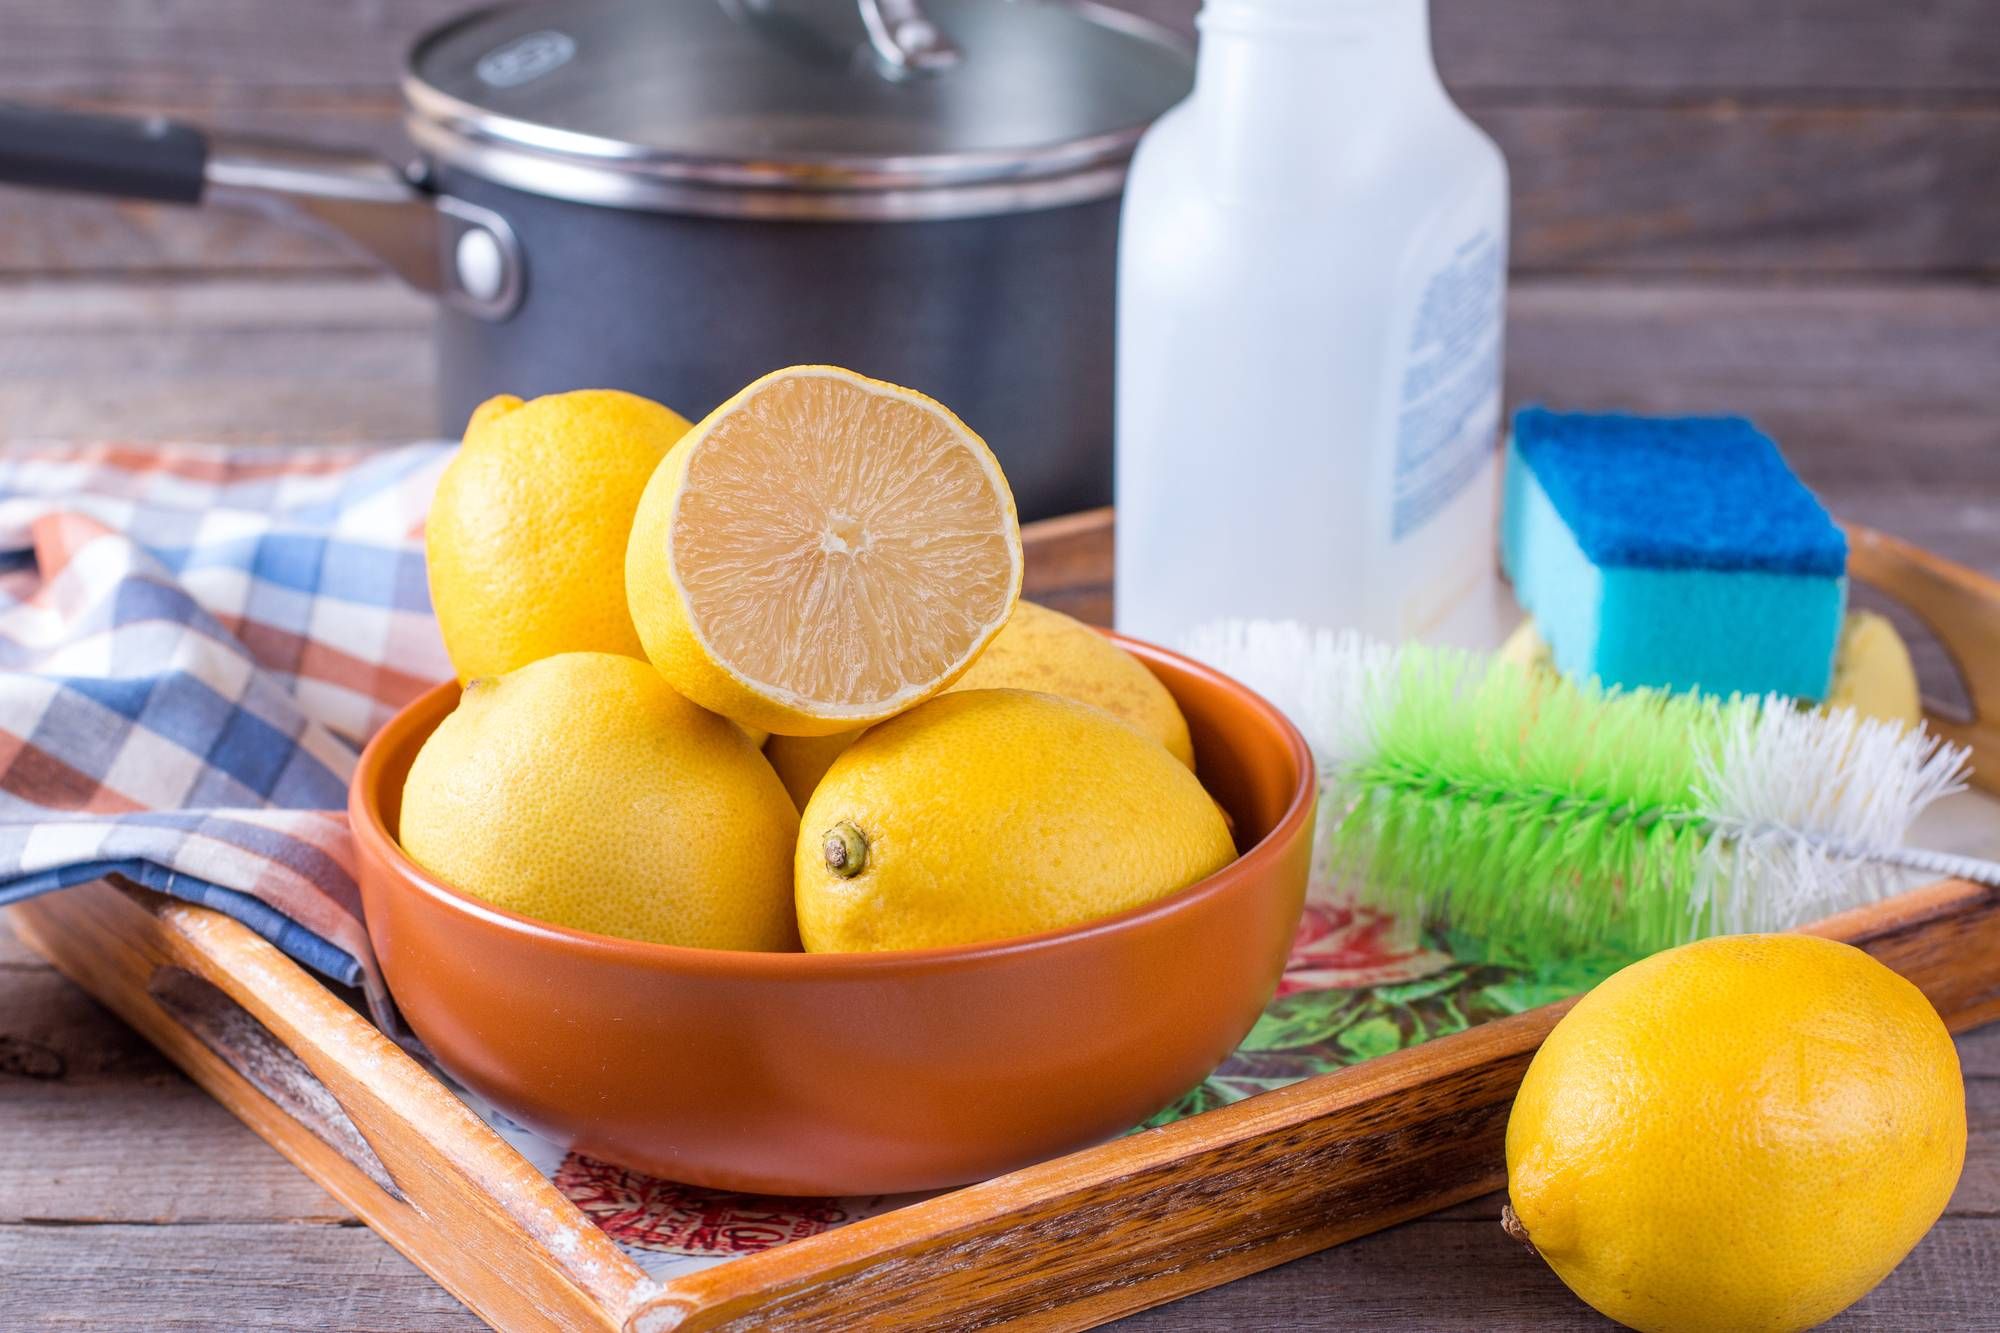 A Simple Green toxic class action claims that the cleaning products are misrepresented as non-toxic.